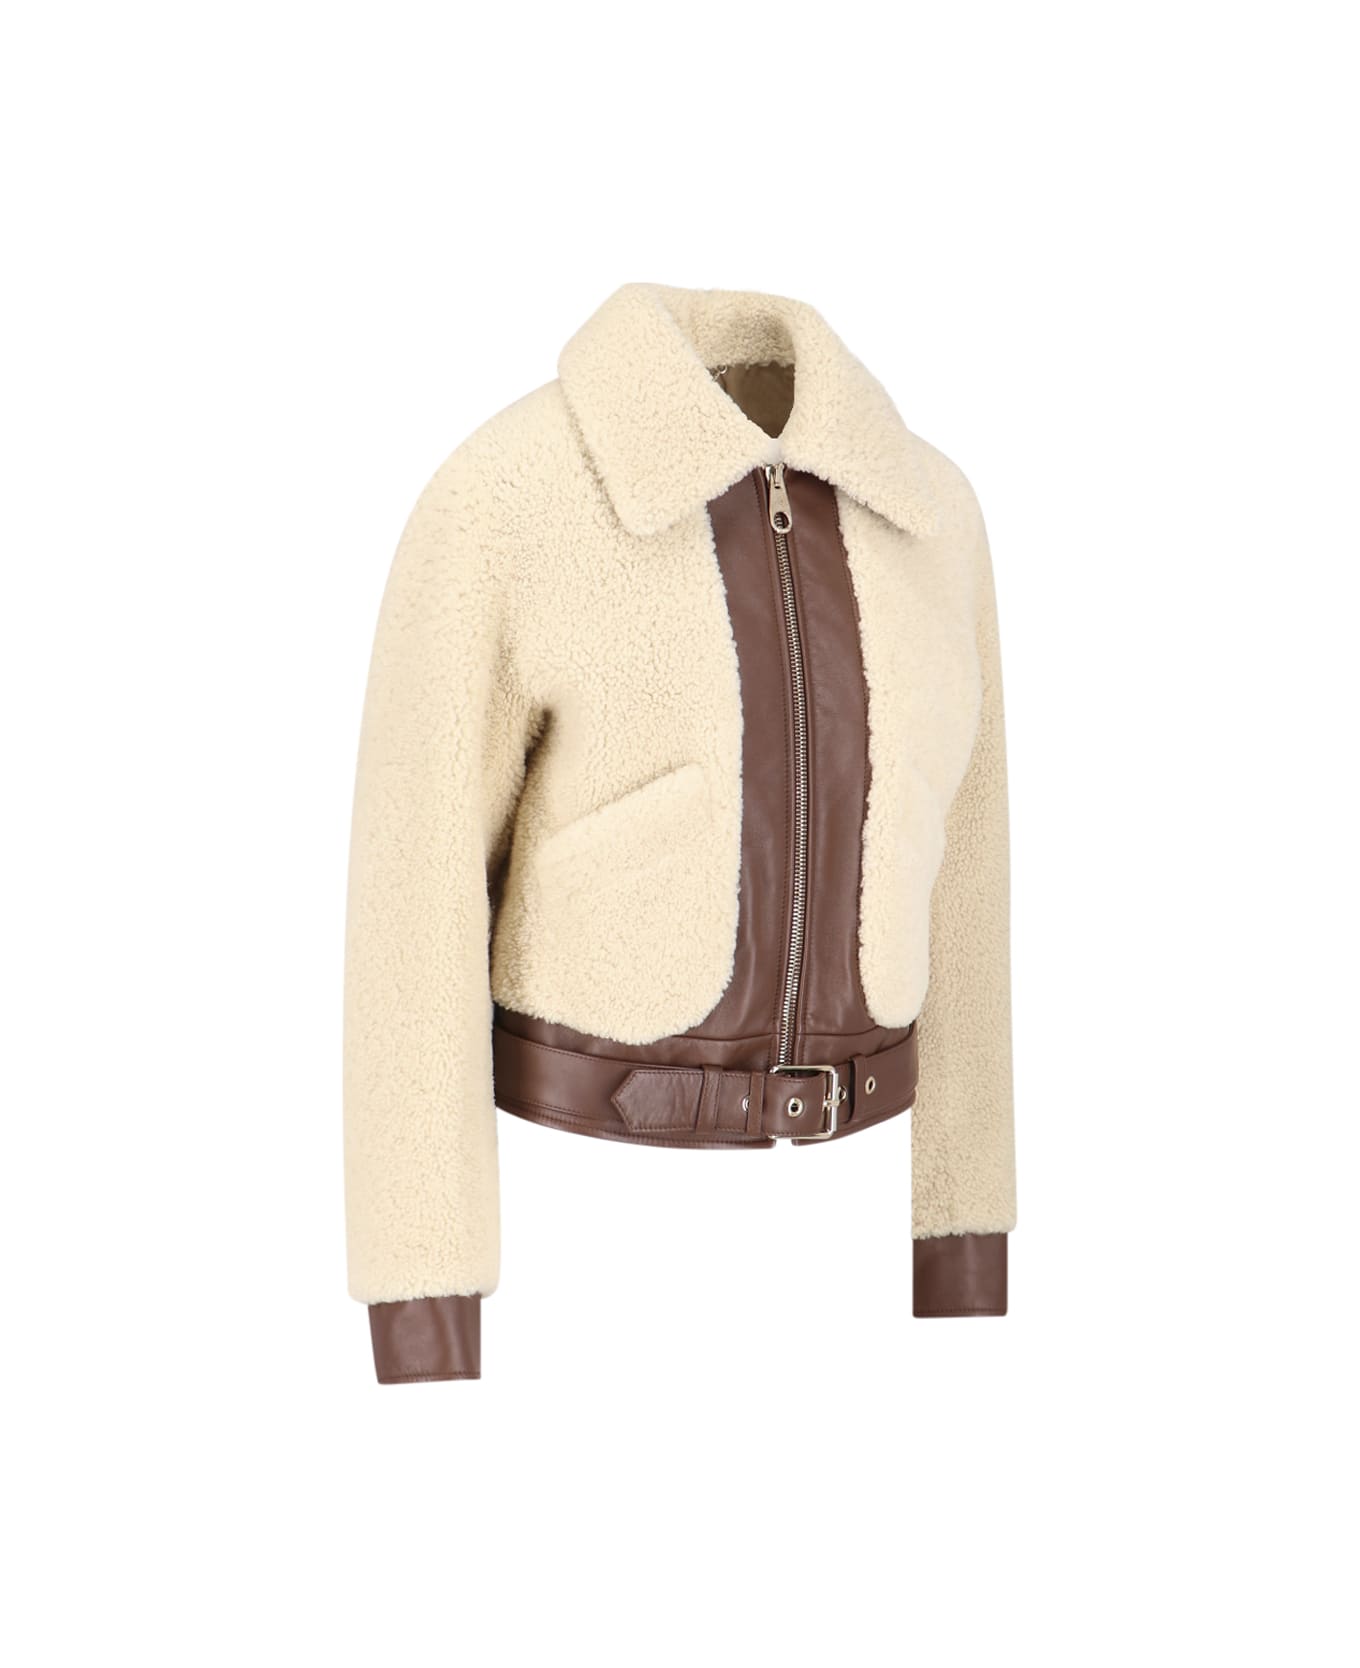 Chloé Beige And Brown Leather And Shearling Bomber Jacket - Cream